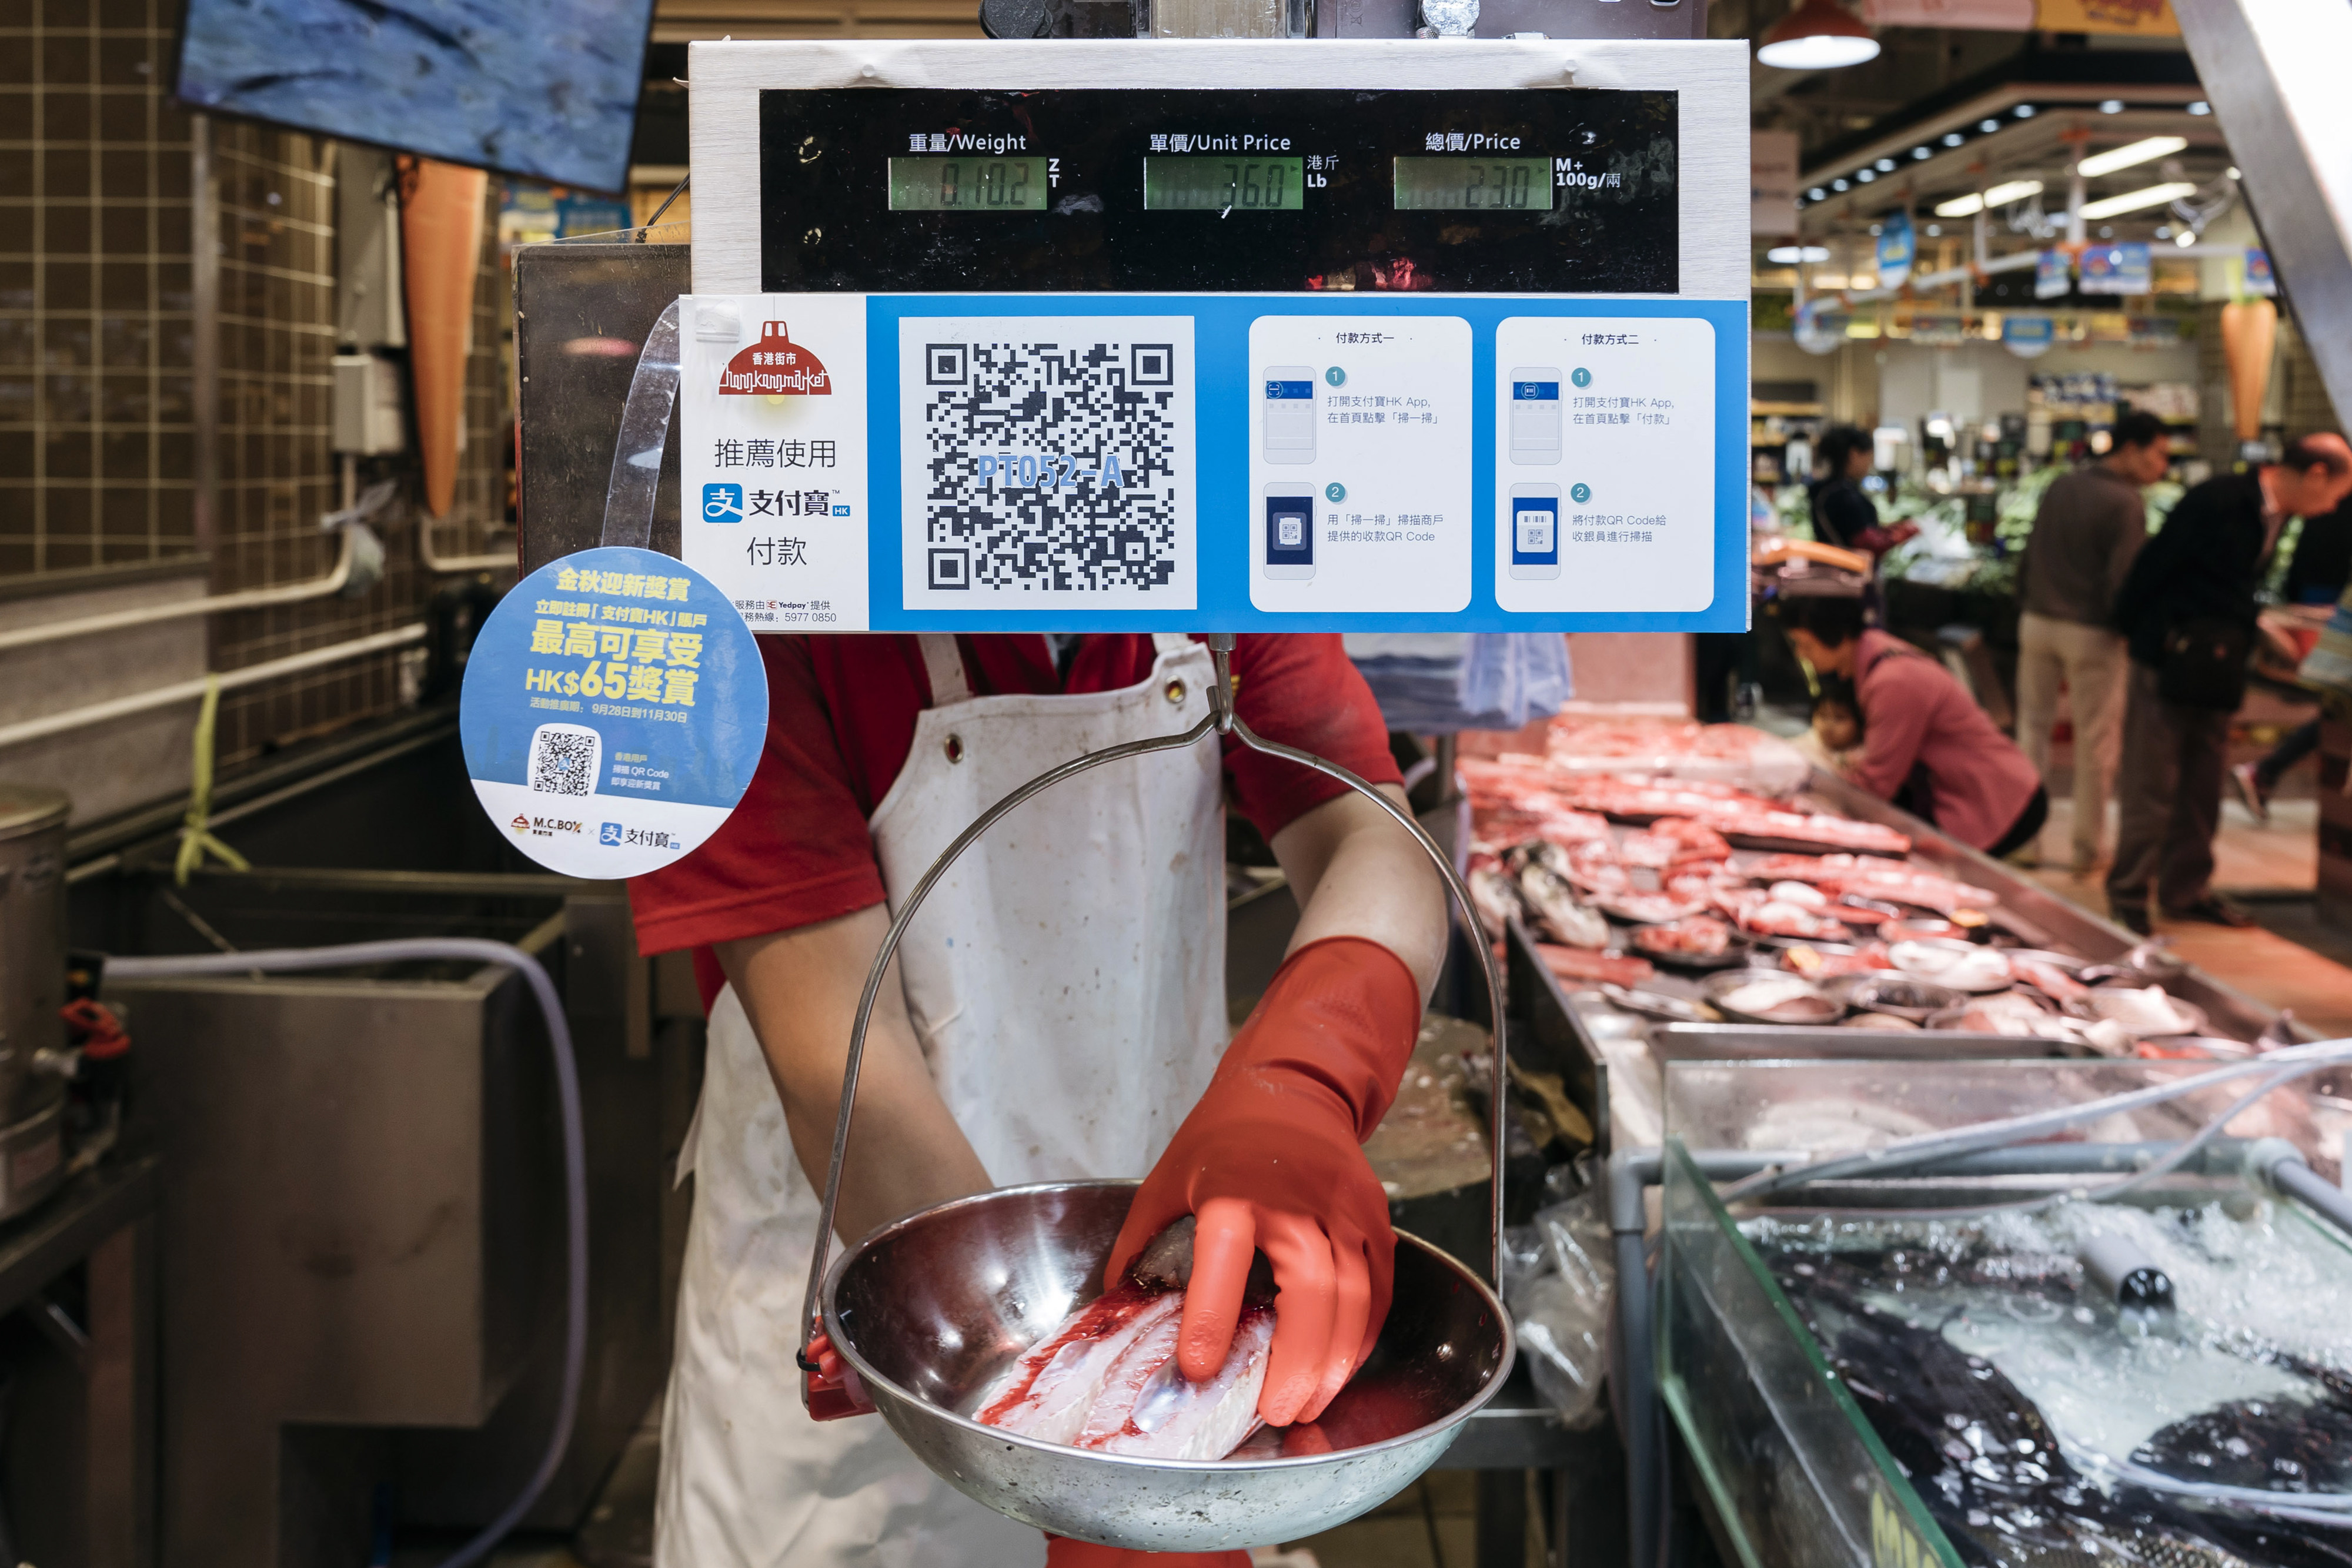 A sign at a fish vendor in Hong Kong’s Po Tat Market informs shoppers that payment can be made through Alipay, in November 2017. Photo: Bloomberg